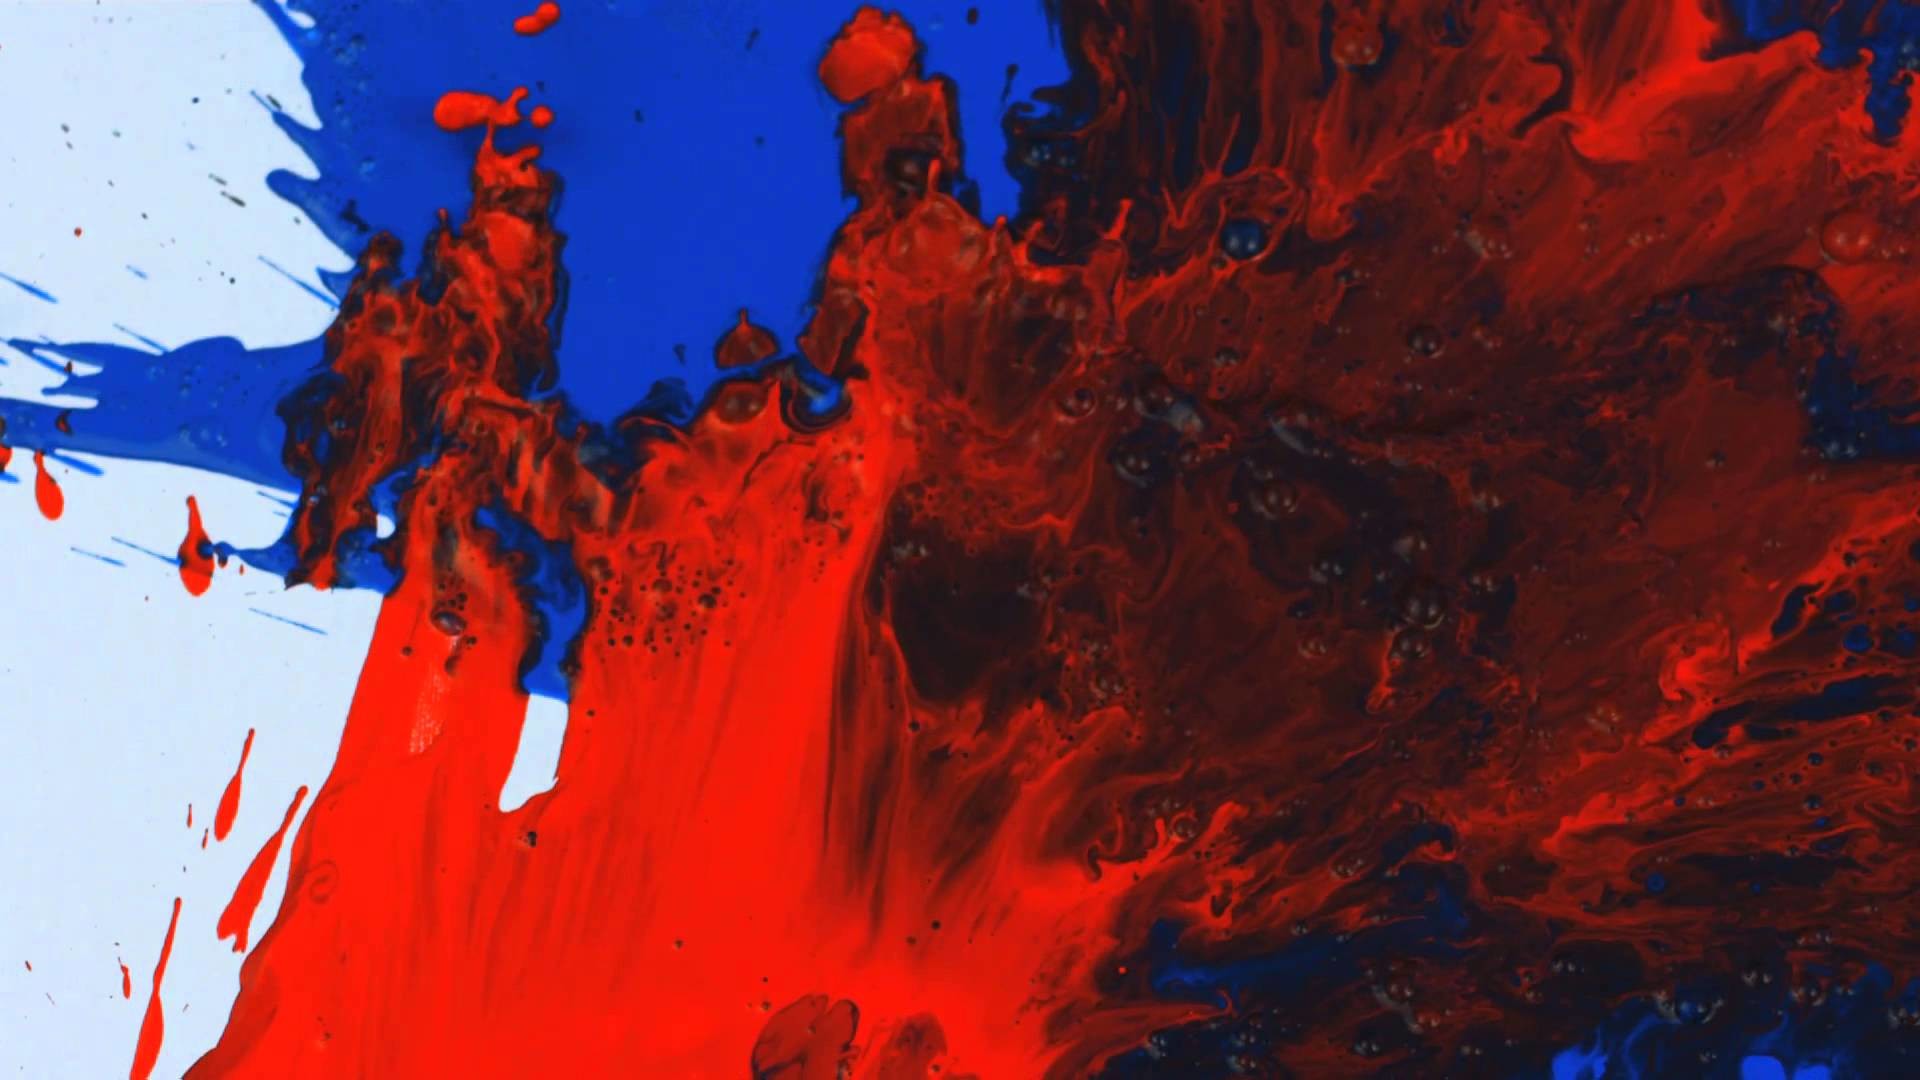 1920x1080 slow motion red and blue on white paint splatter wjt uqvxr .